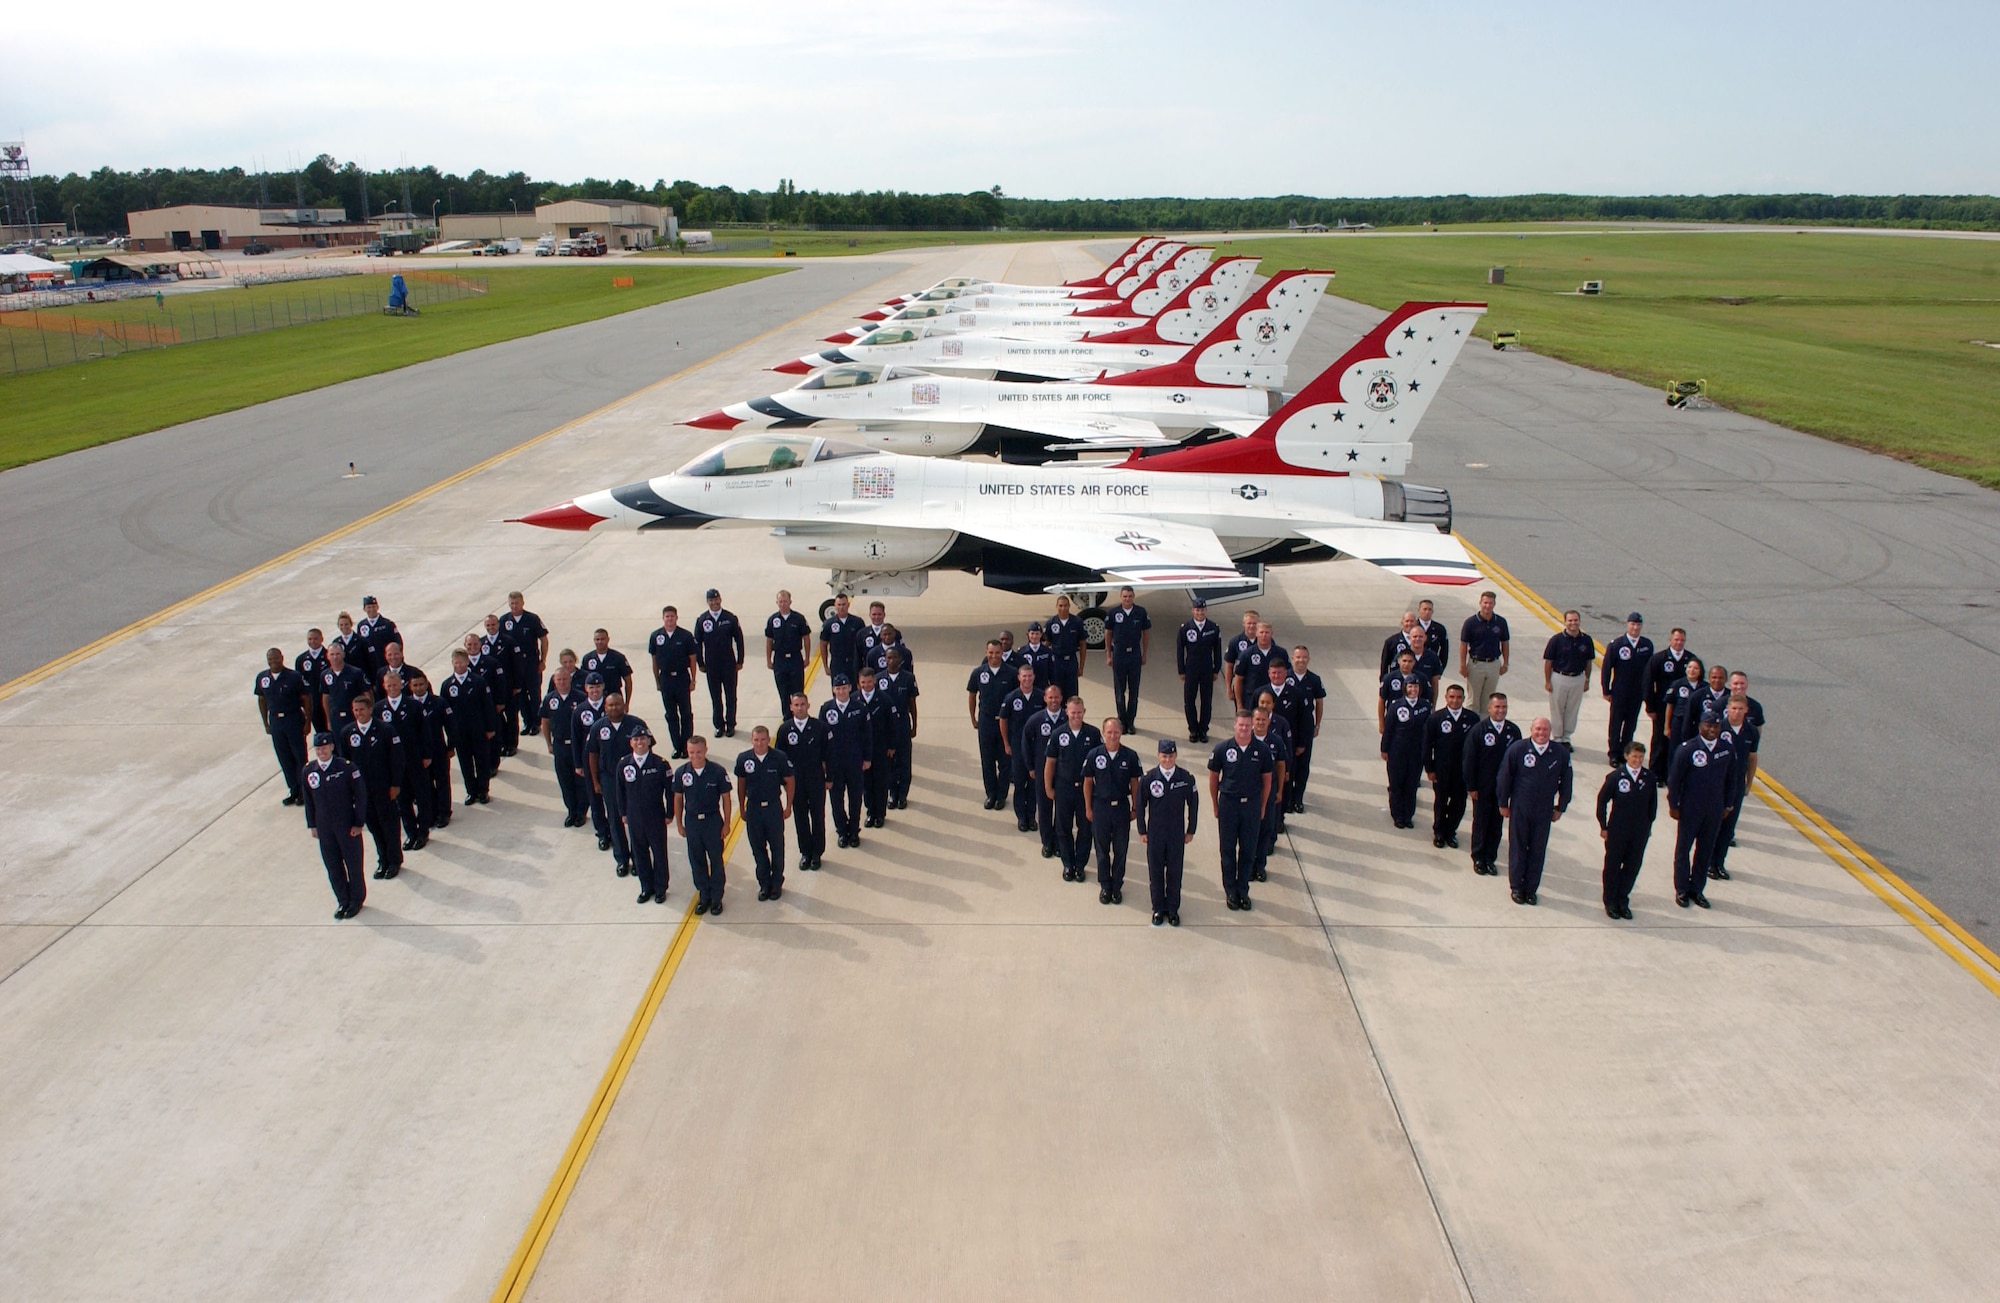 Airmen from the United States Air Force Air Demonstration Squadron, the Thunderbirds, line up to form the number 4,000 to commemorate the team's milestone air show on Saturday, May 13, 2006. (U.S. Air Force photo)

